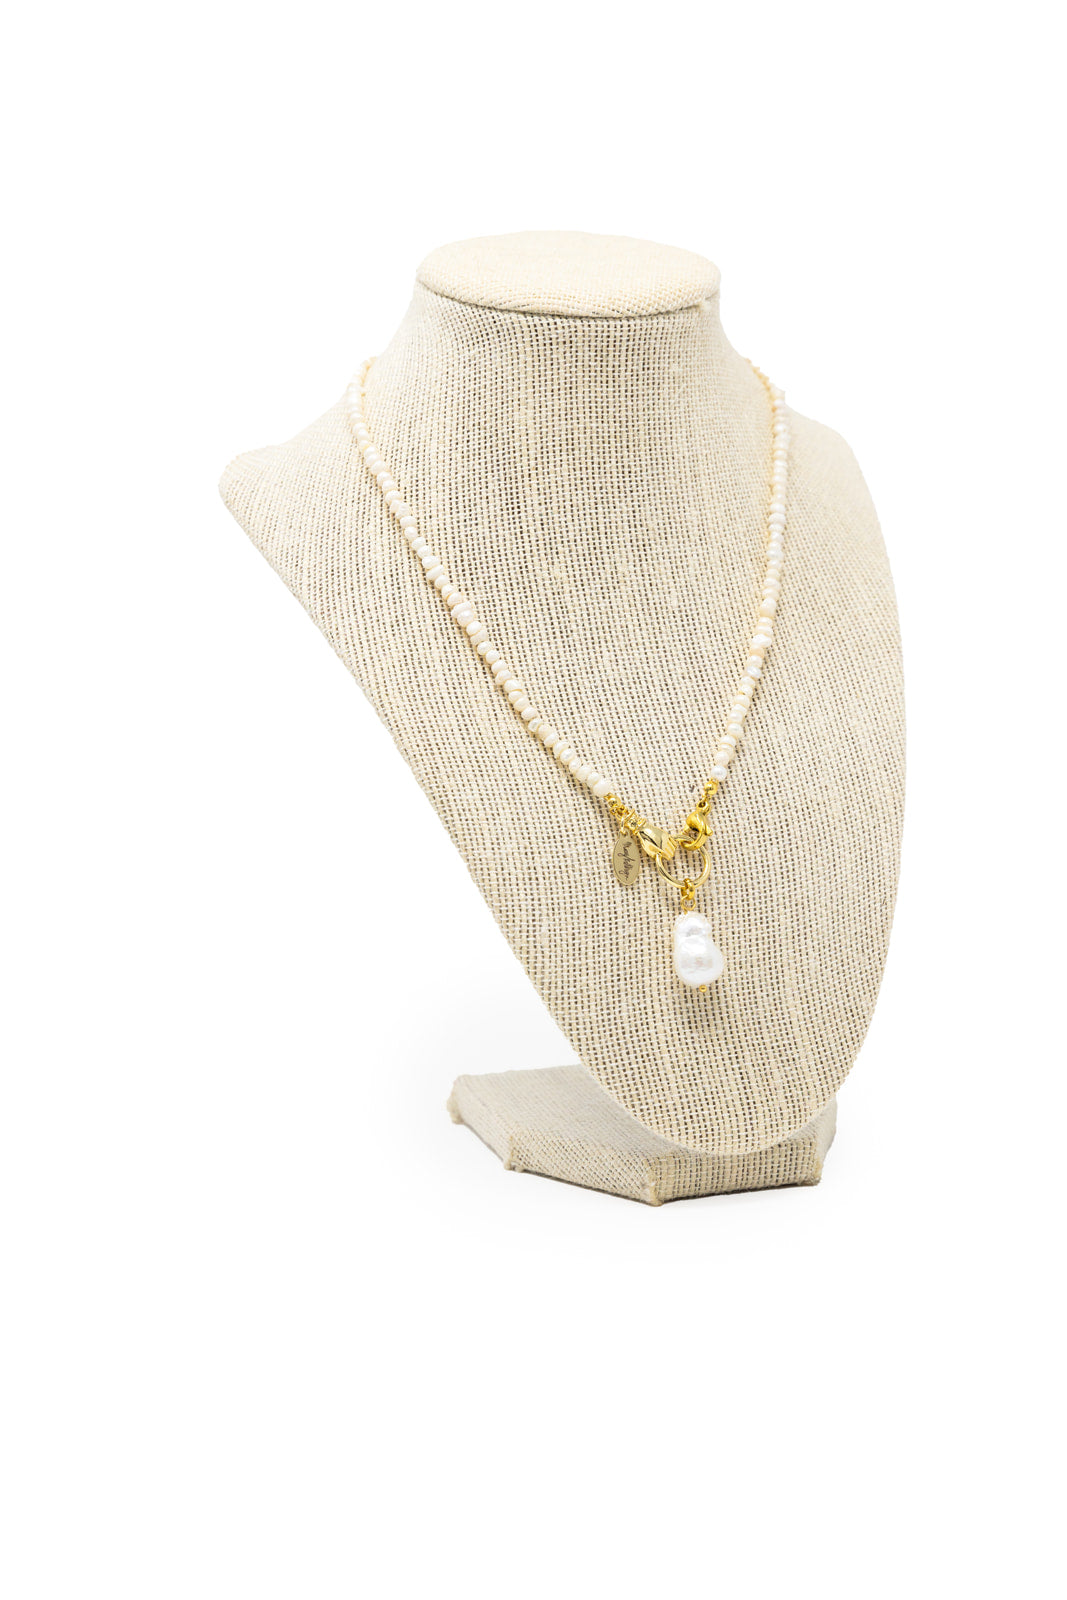 Catch + Release Pearl Droplet Necklace